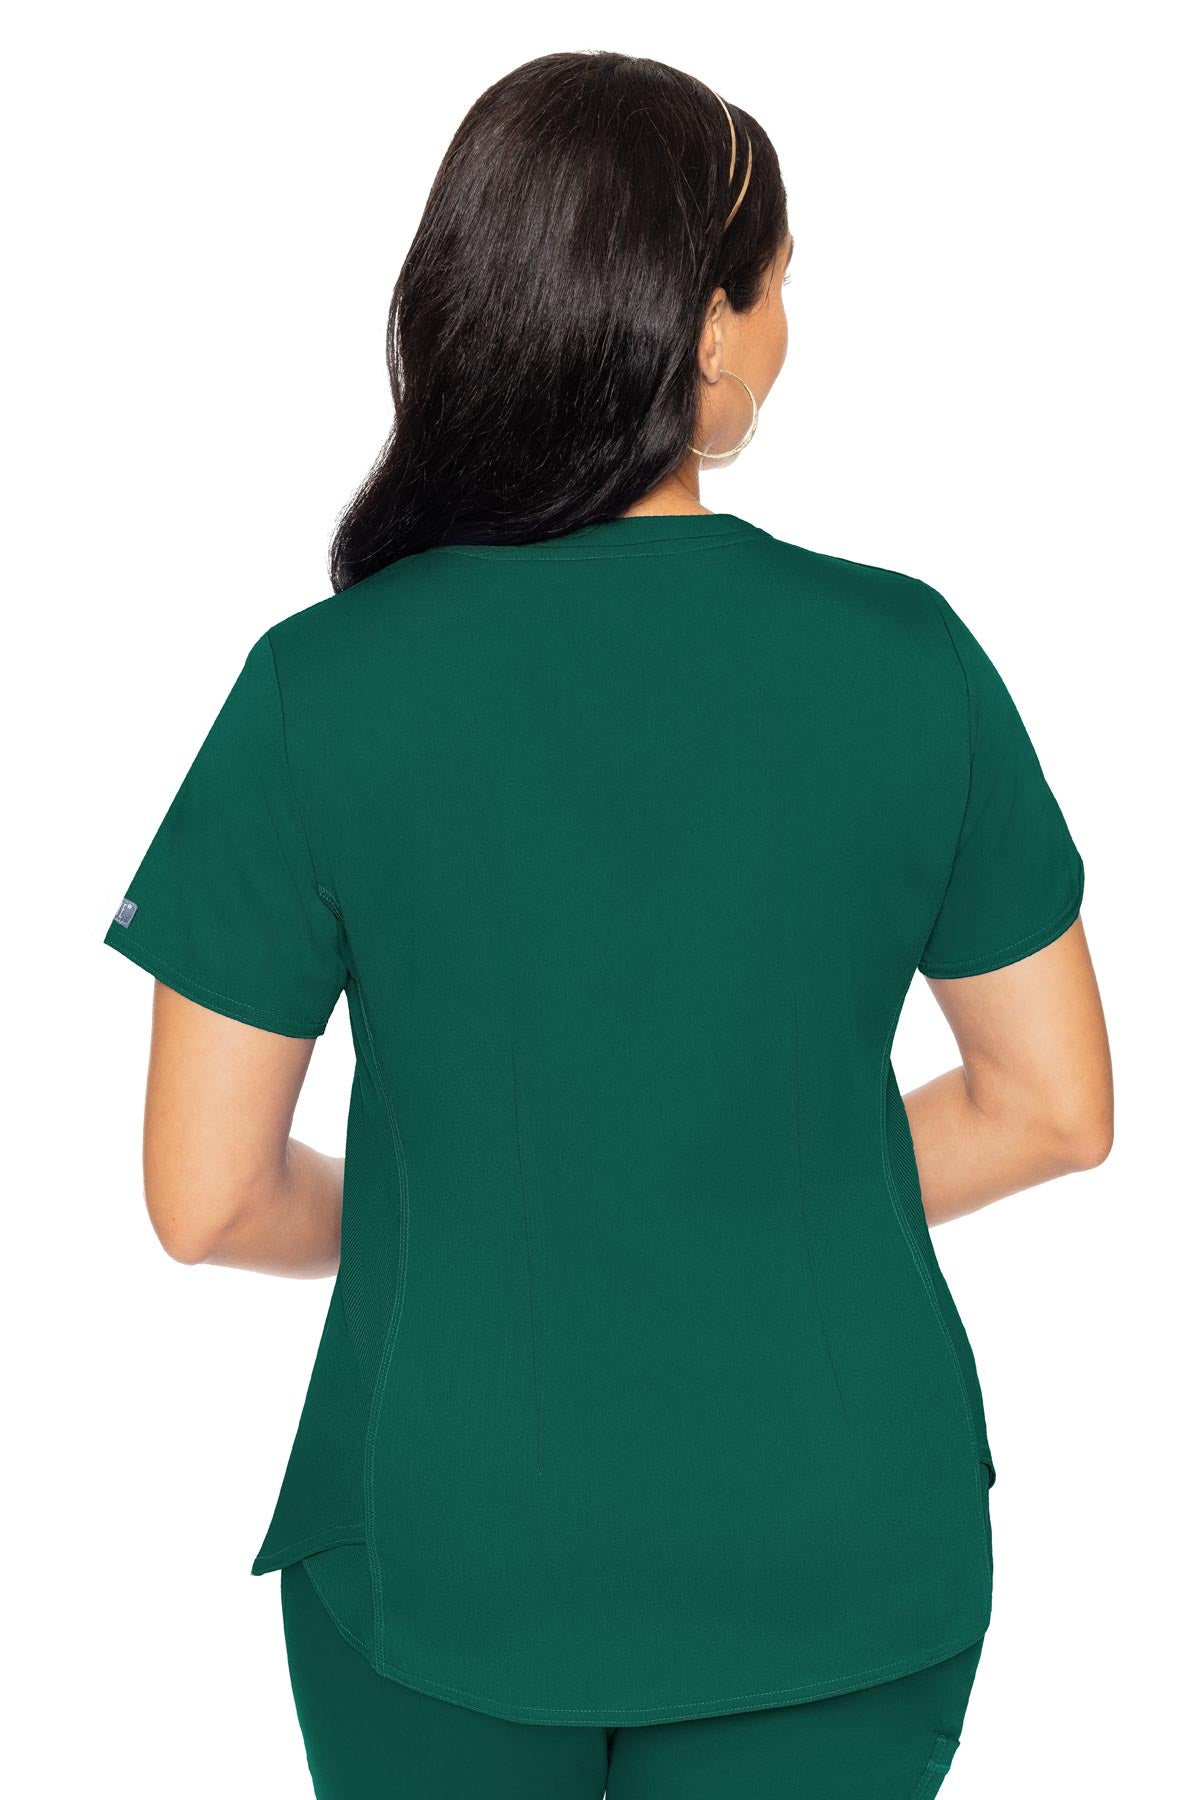 Med Couture Touch 7459 Women's V-Neck Shirttail Top Hunter Back